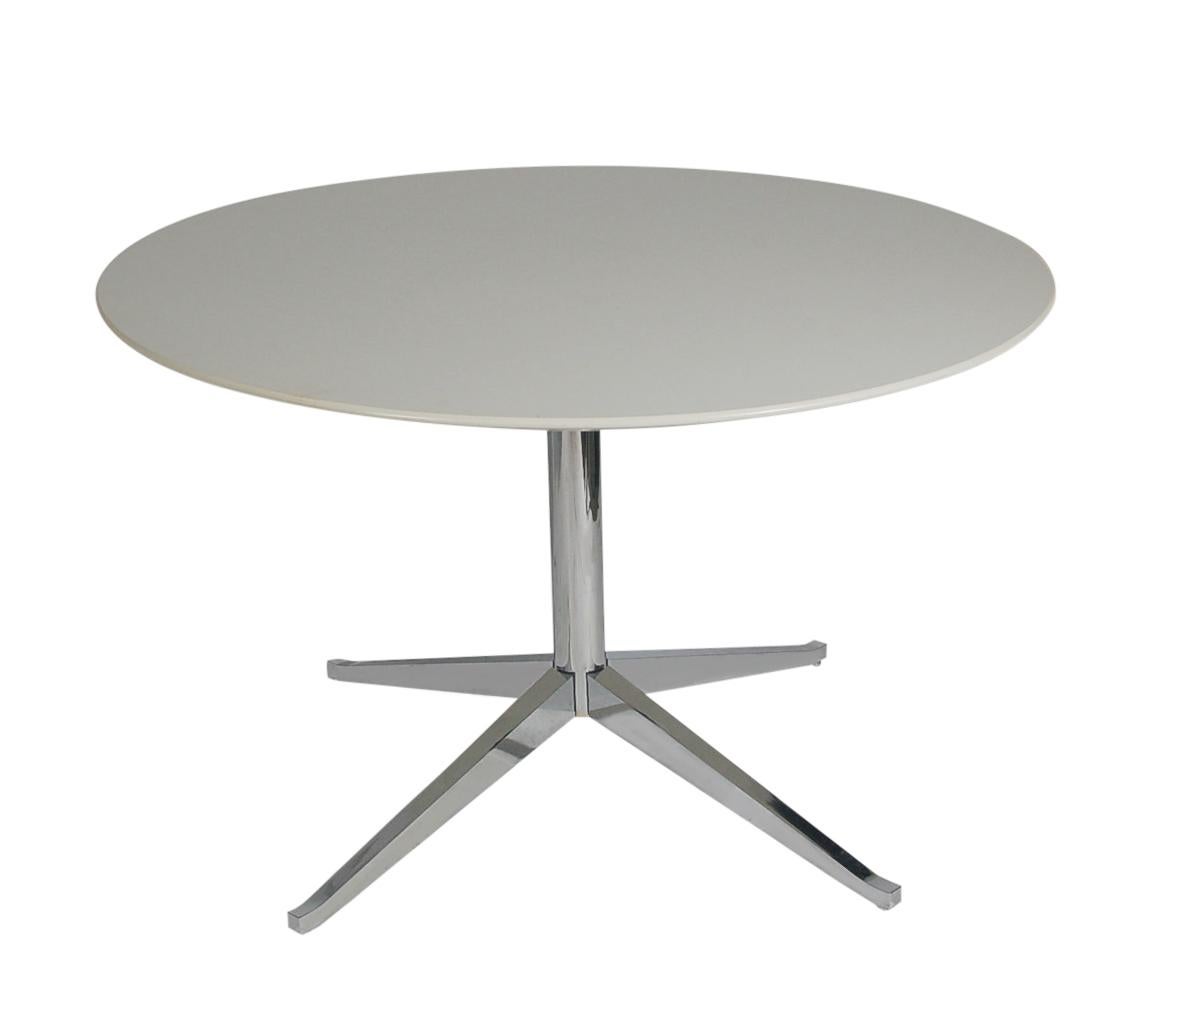 American Mid-Century Modern Round Dining Table or Desk by Florence Knoll for Knoll